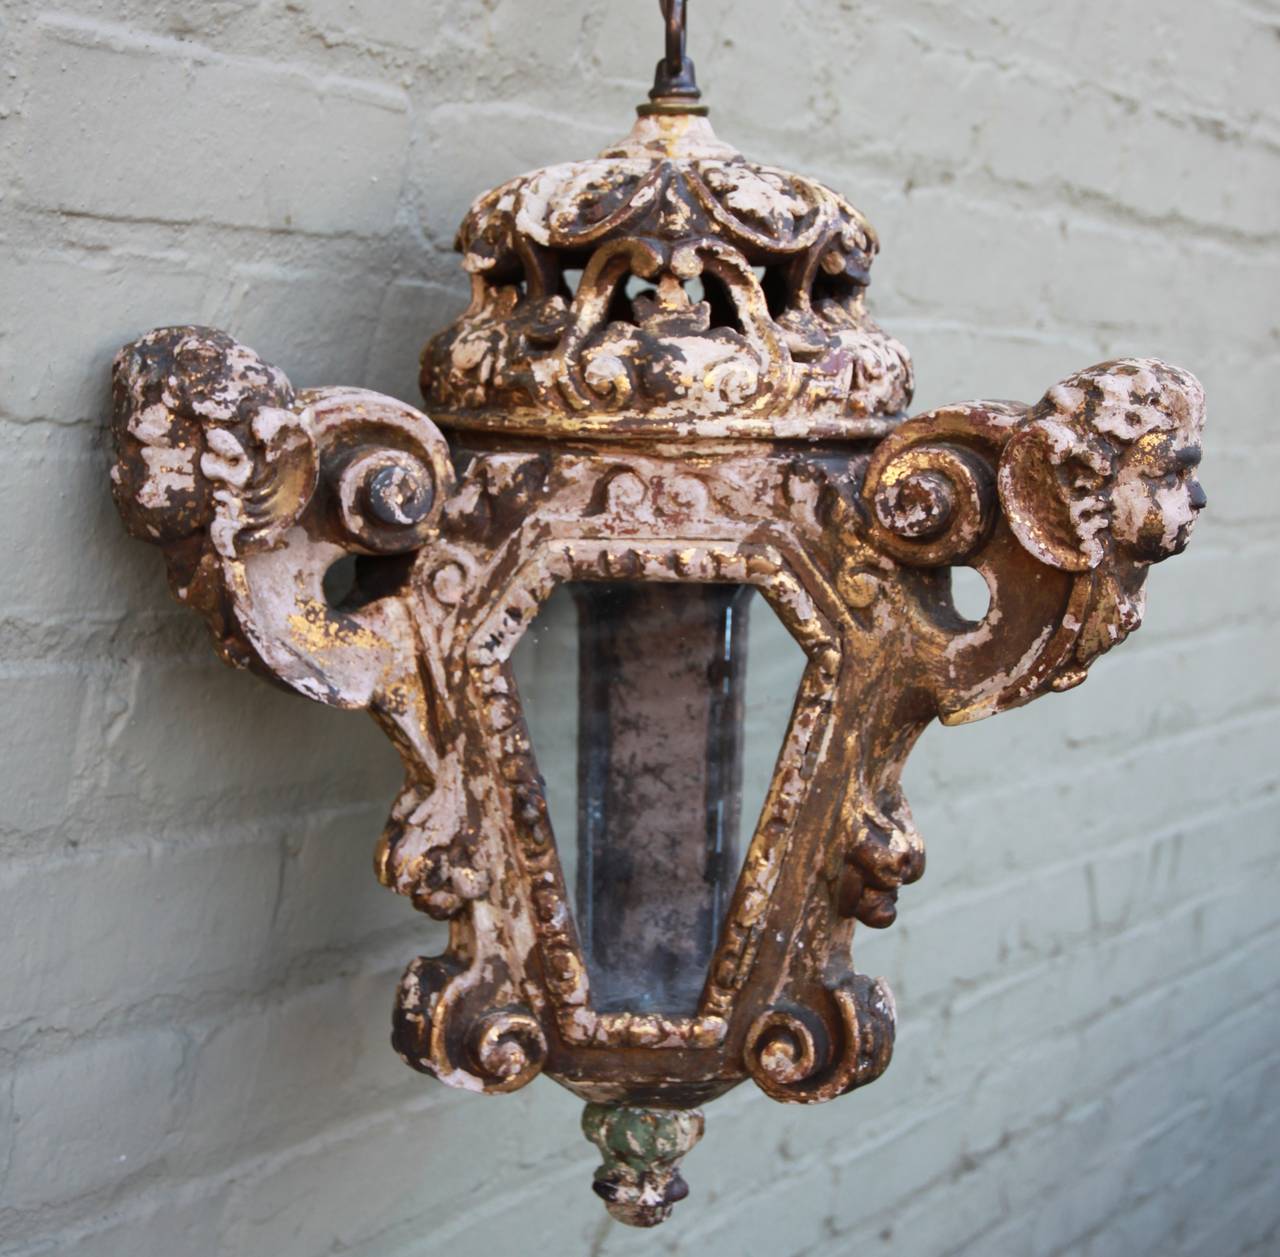 Pair of Italian Baroque style cherub lanterns with chain and canopy. Newly rewired and in working condition.